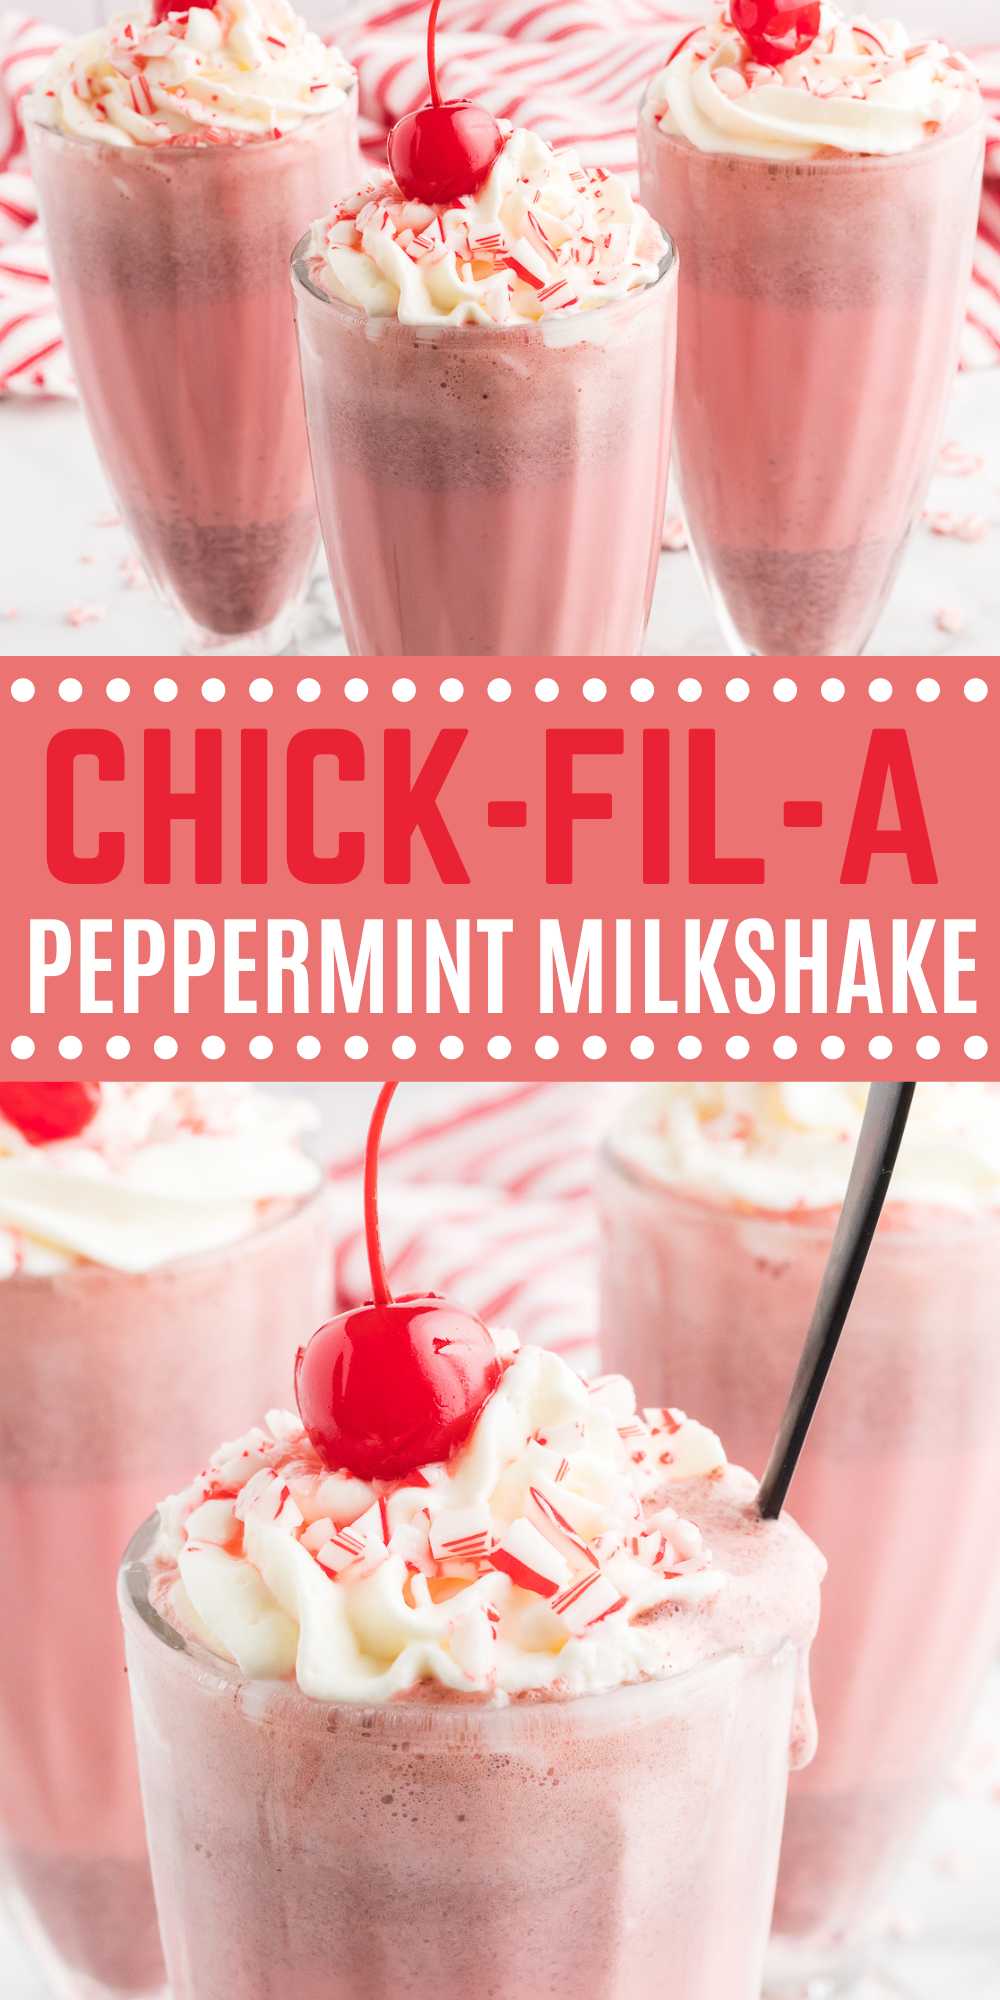 Chick-Fil-A Peppermint Milkshake is a delicious milkshake and easy to make. Save time and money and make this flavorful milkshake at home. We love the peppermint and chocolate chips blended together to make a creamy shake. #eatingonadime #peppermintmilkshake #copycatpeppermintmilkshake